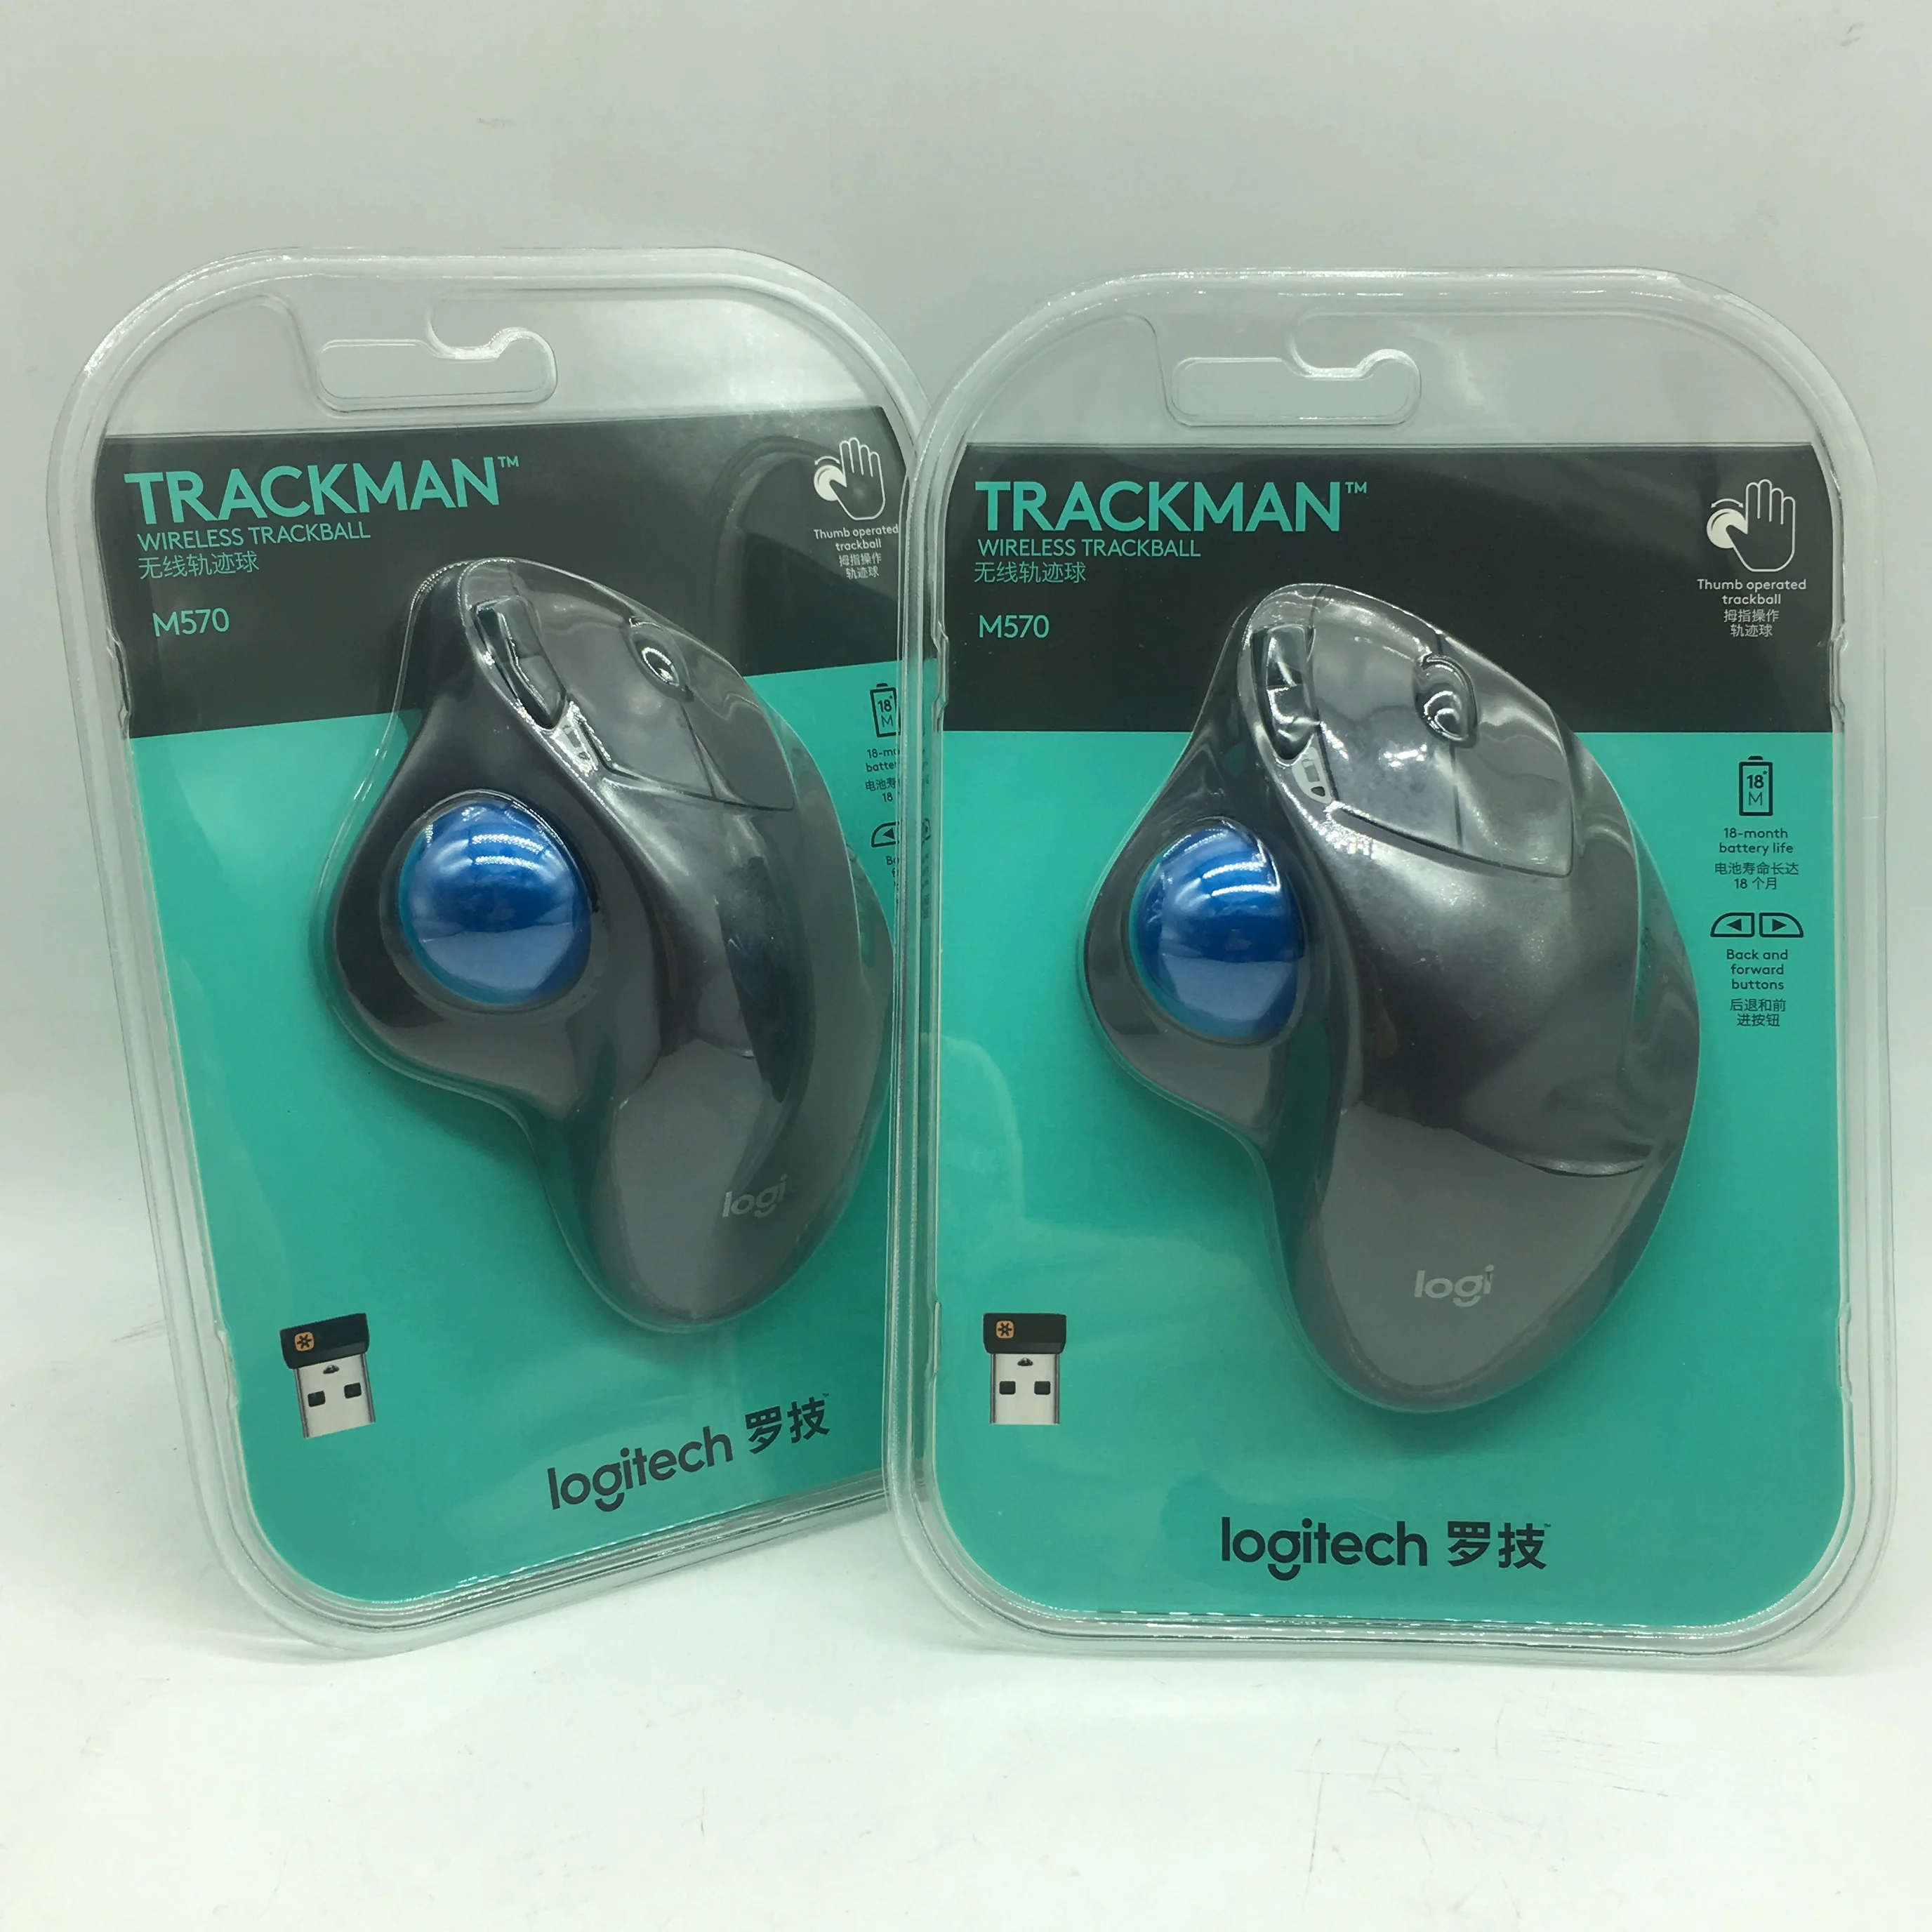 Wholesale Logitech M570 Wireless Gaming Mouse Optical Trackball Ergonomic Mouse Gamer Windows 10/8/7 OS Support Official Test From m.alibaba.com